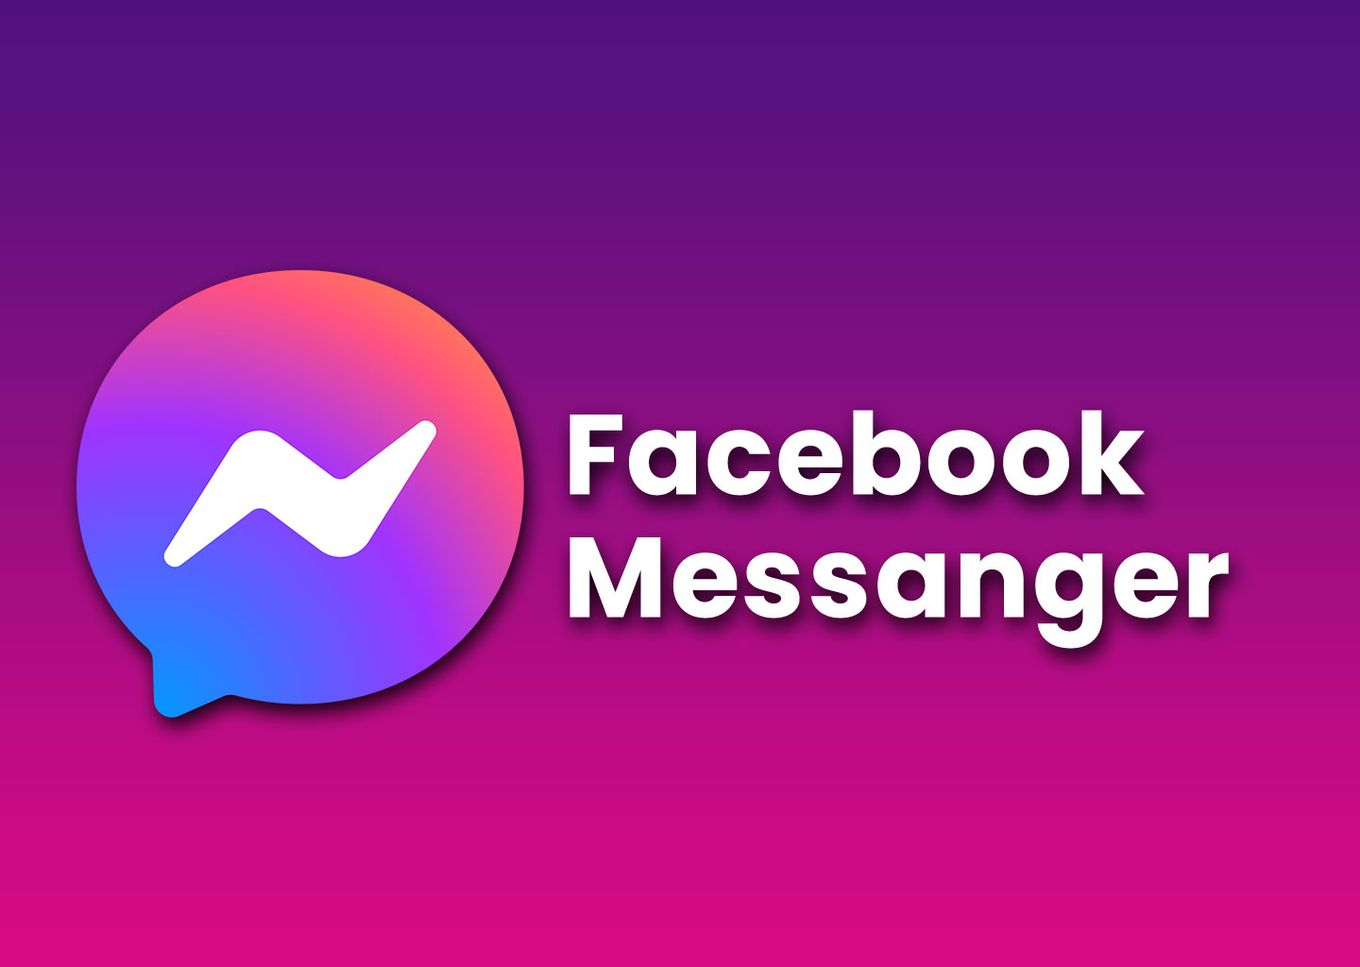 iOS and Android Messaging - Facebook Messenger